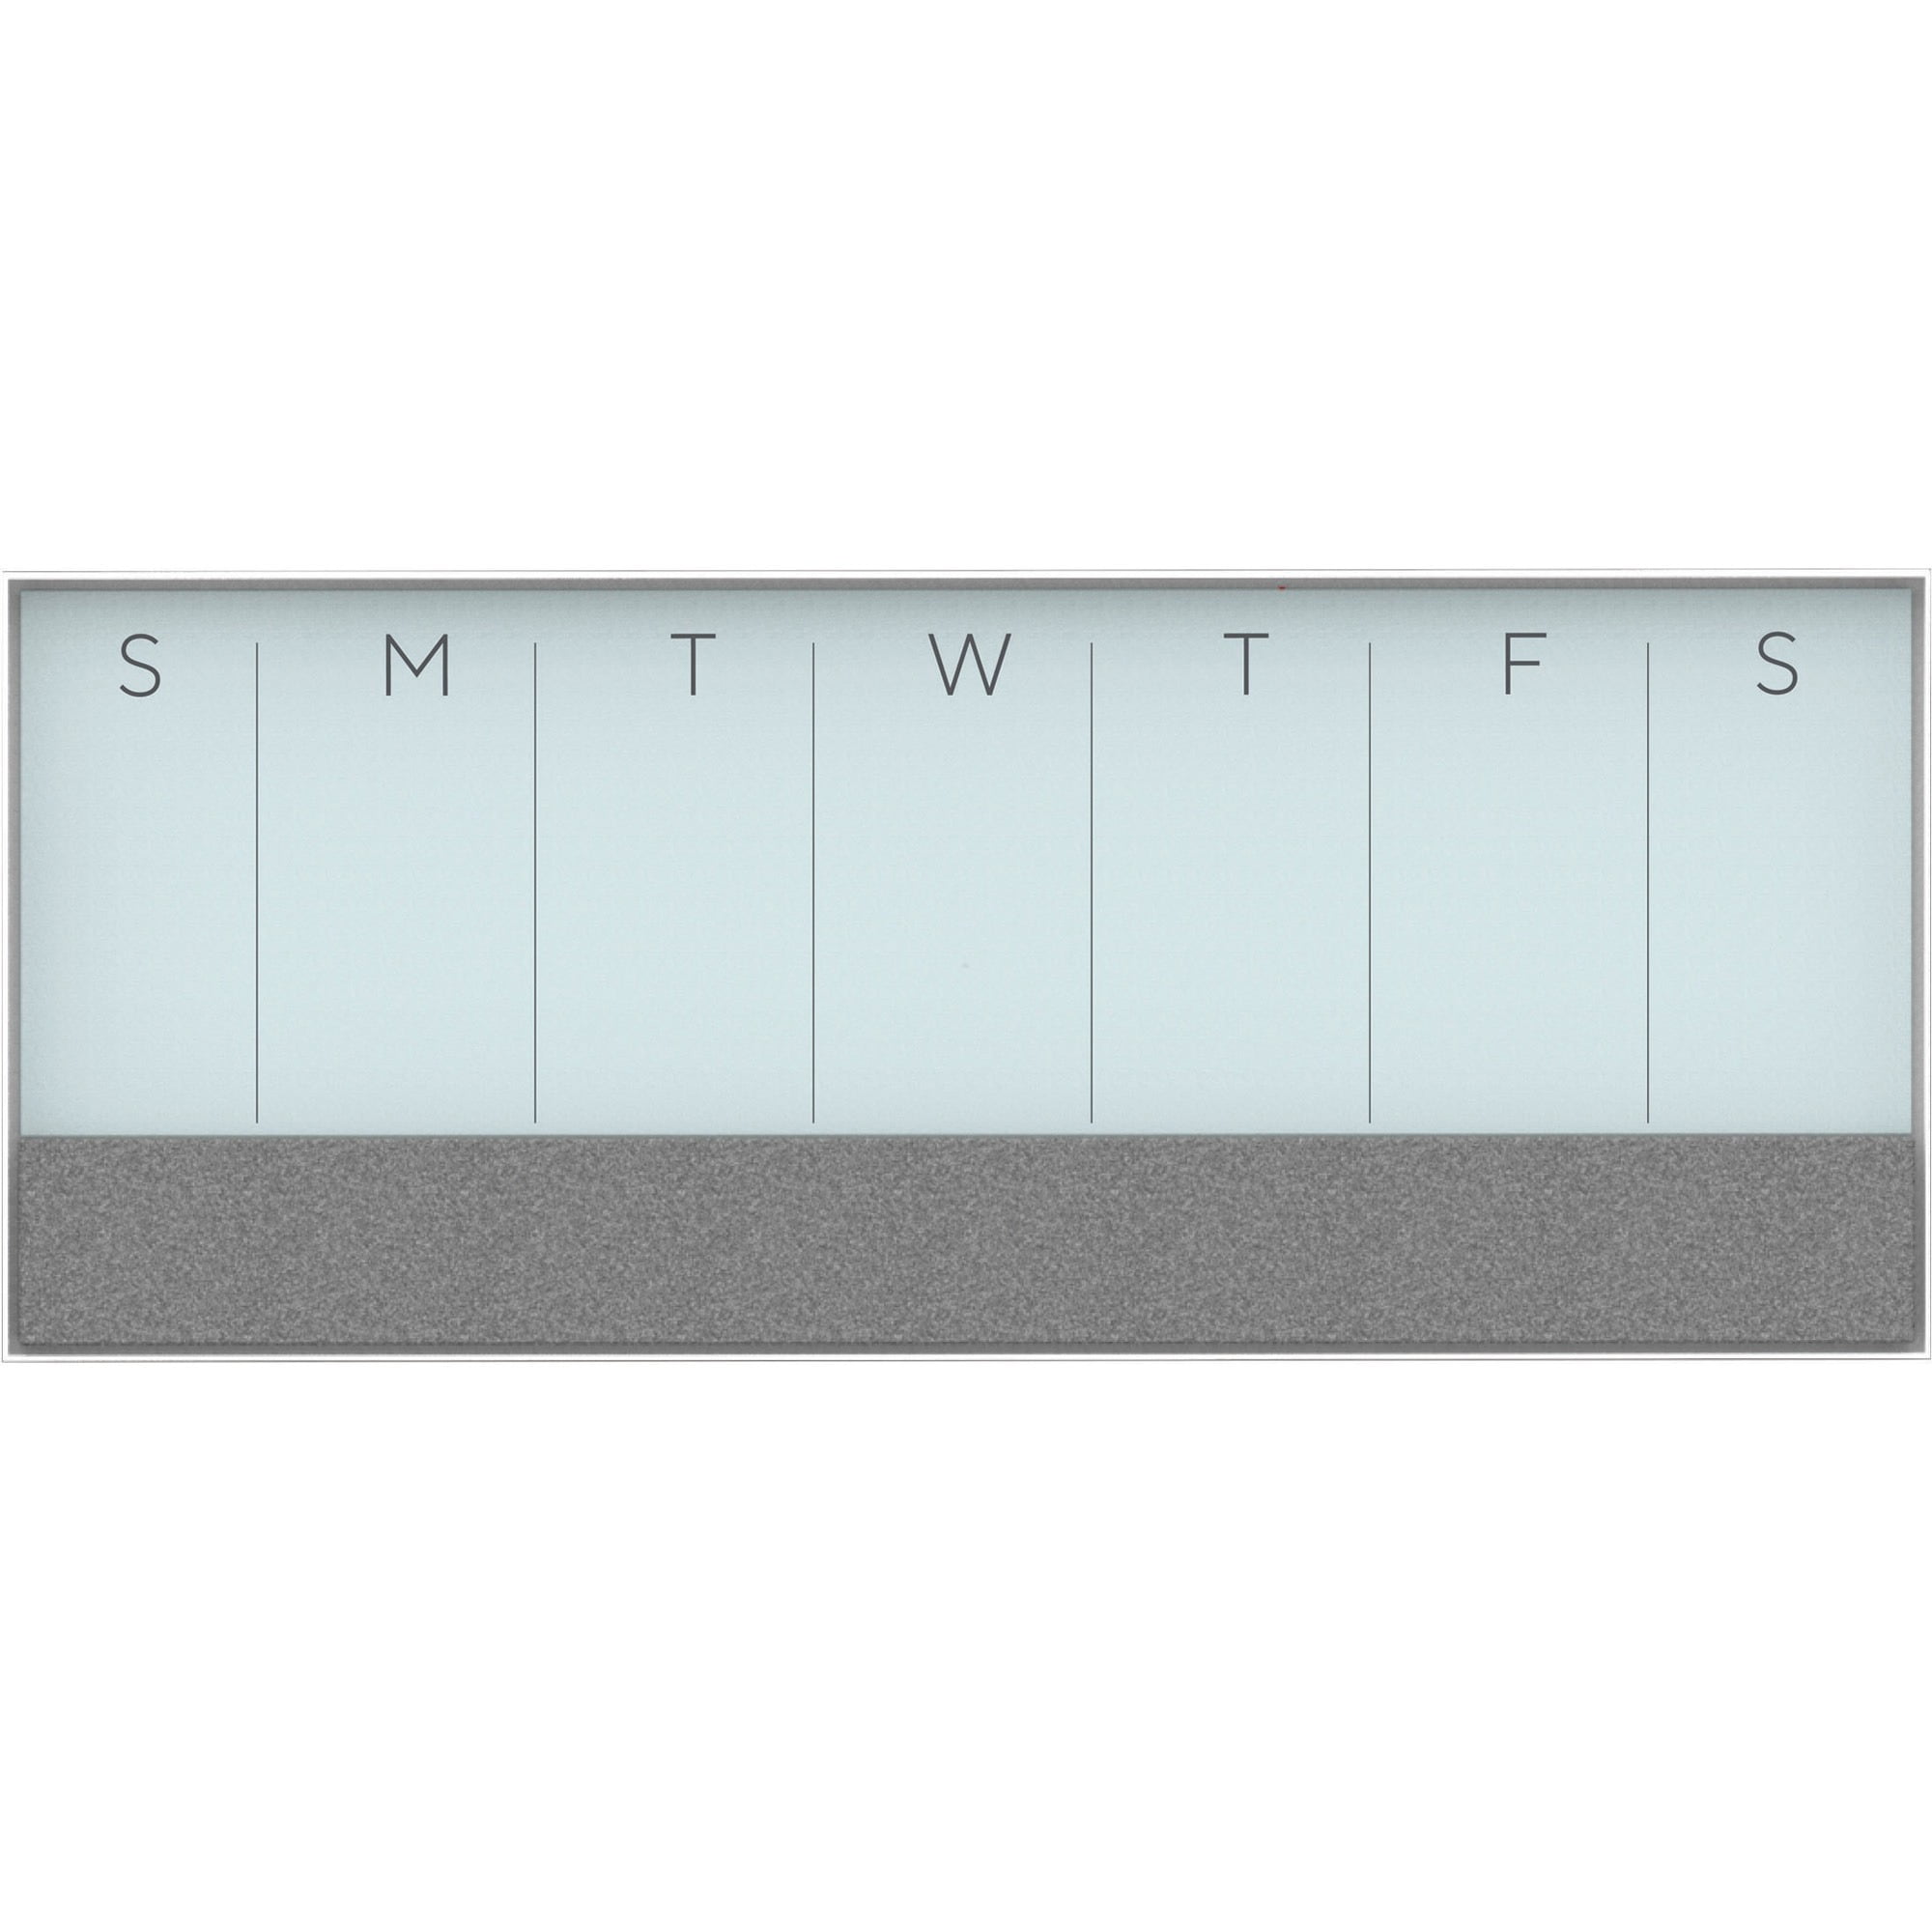 U Brands Weekly Calendar Glass Dry Erase Board, Only for use